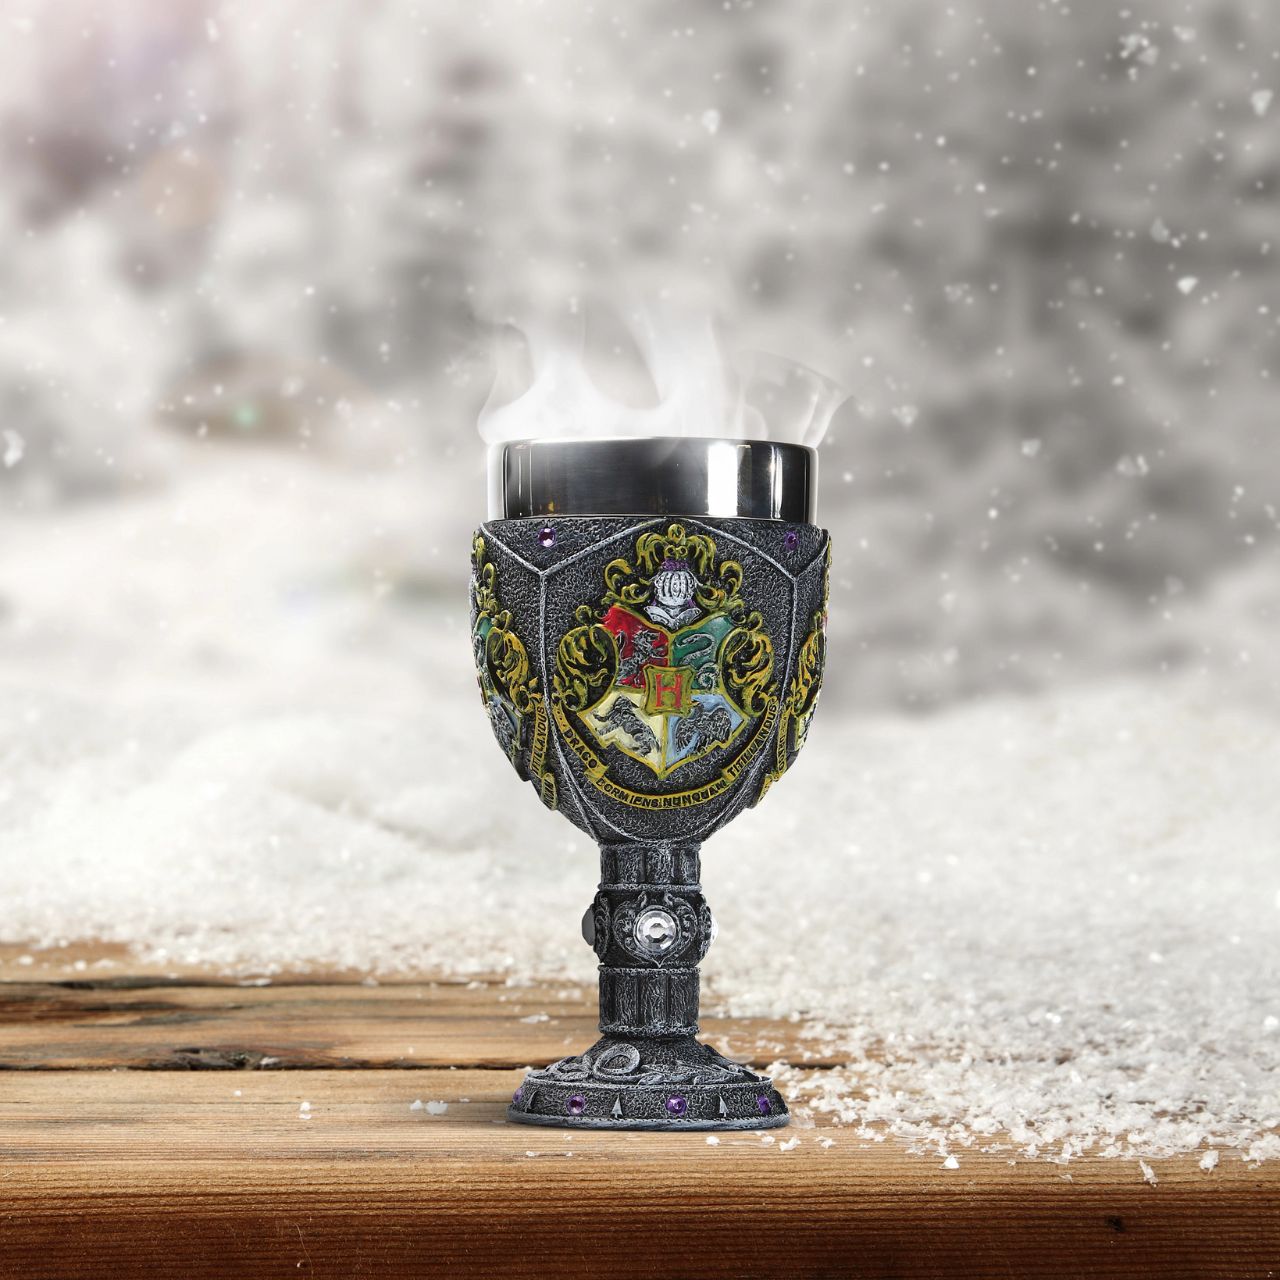 Hogwarts Decorative Goblet  Founded by the four greatest wizards of their time, Hogwarts School of Witchcraft and Wizardry has long been the pinnacle of magical learning. Show your school spirit with this elegant decorative goblet